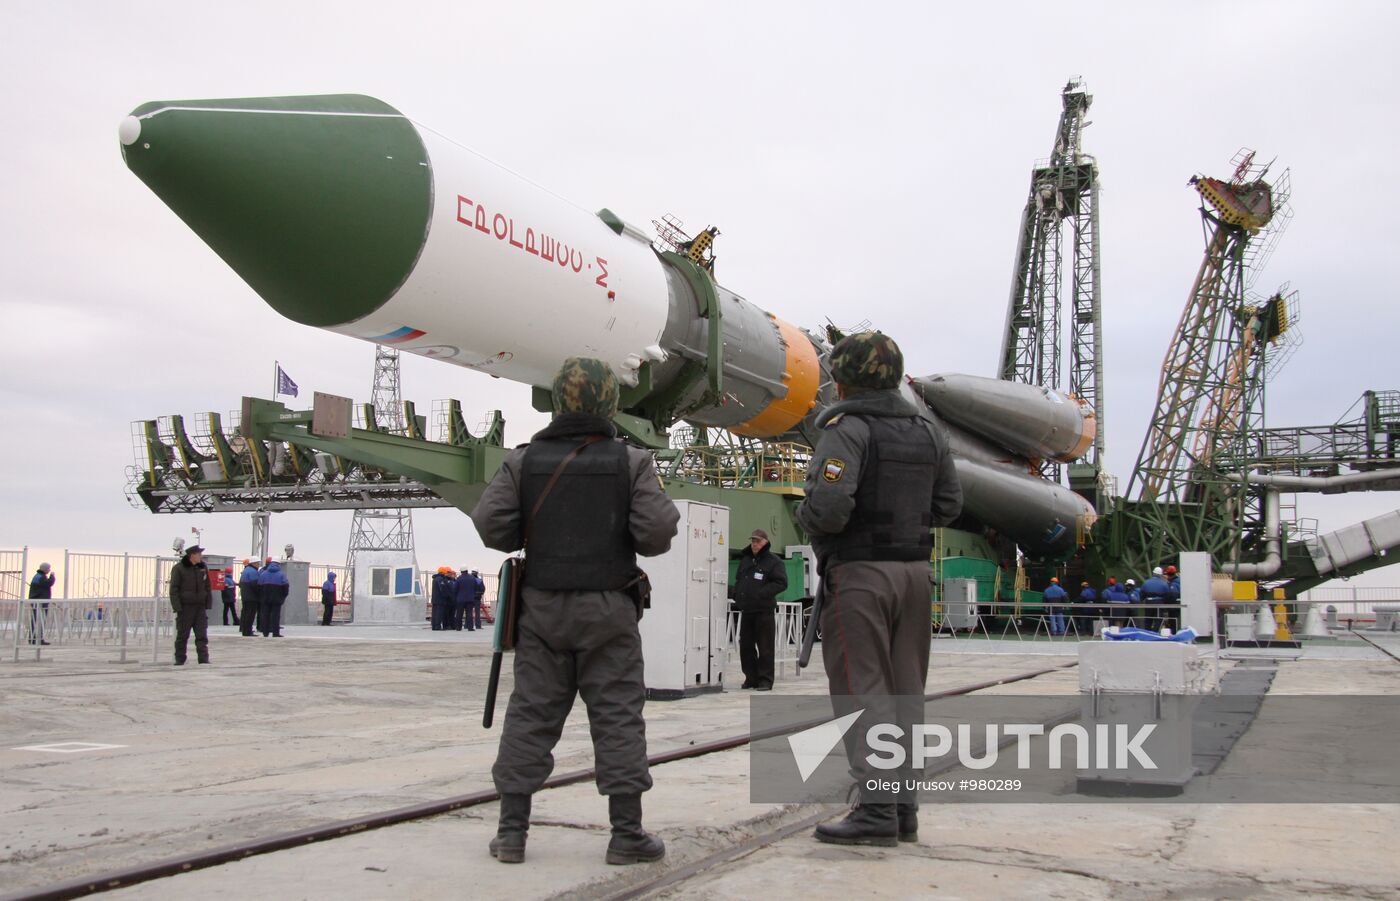 Progress-M13 rocket delivered to launch site